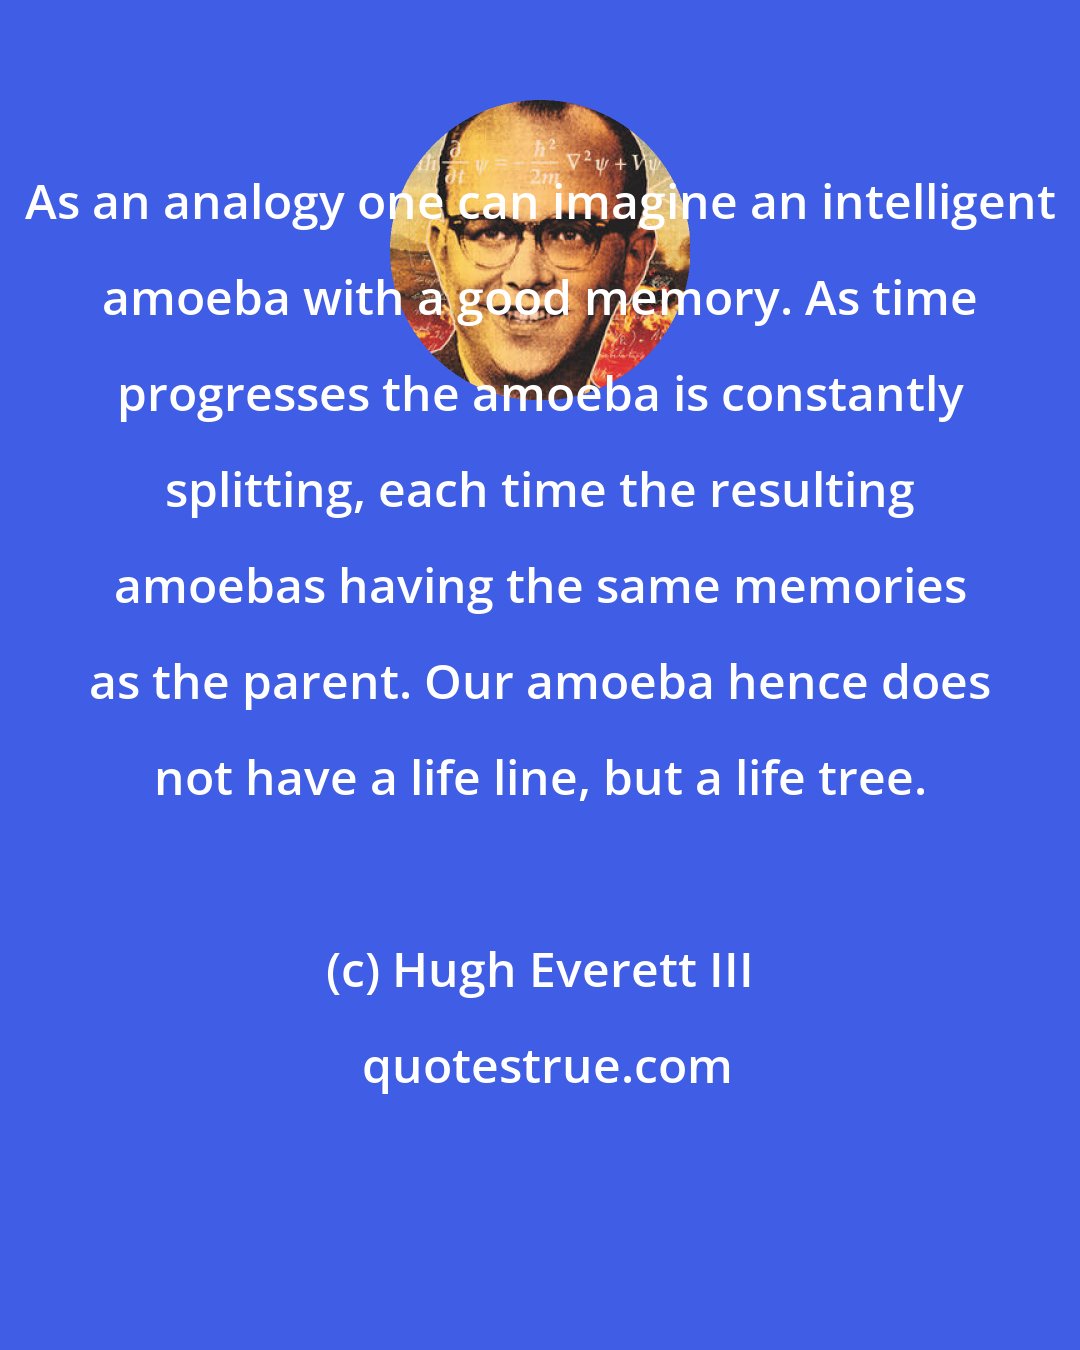 Hugh Everett III: As an analogy one can imagine an intelligent amoeba with a good memory. As time progresses the amoeba is constantly splitting, each time the resulting amoebas having the same memories as the parent. Our amoeba hence does not have a life line, but a life tree.